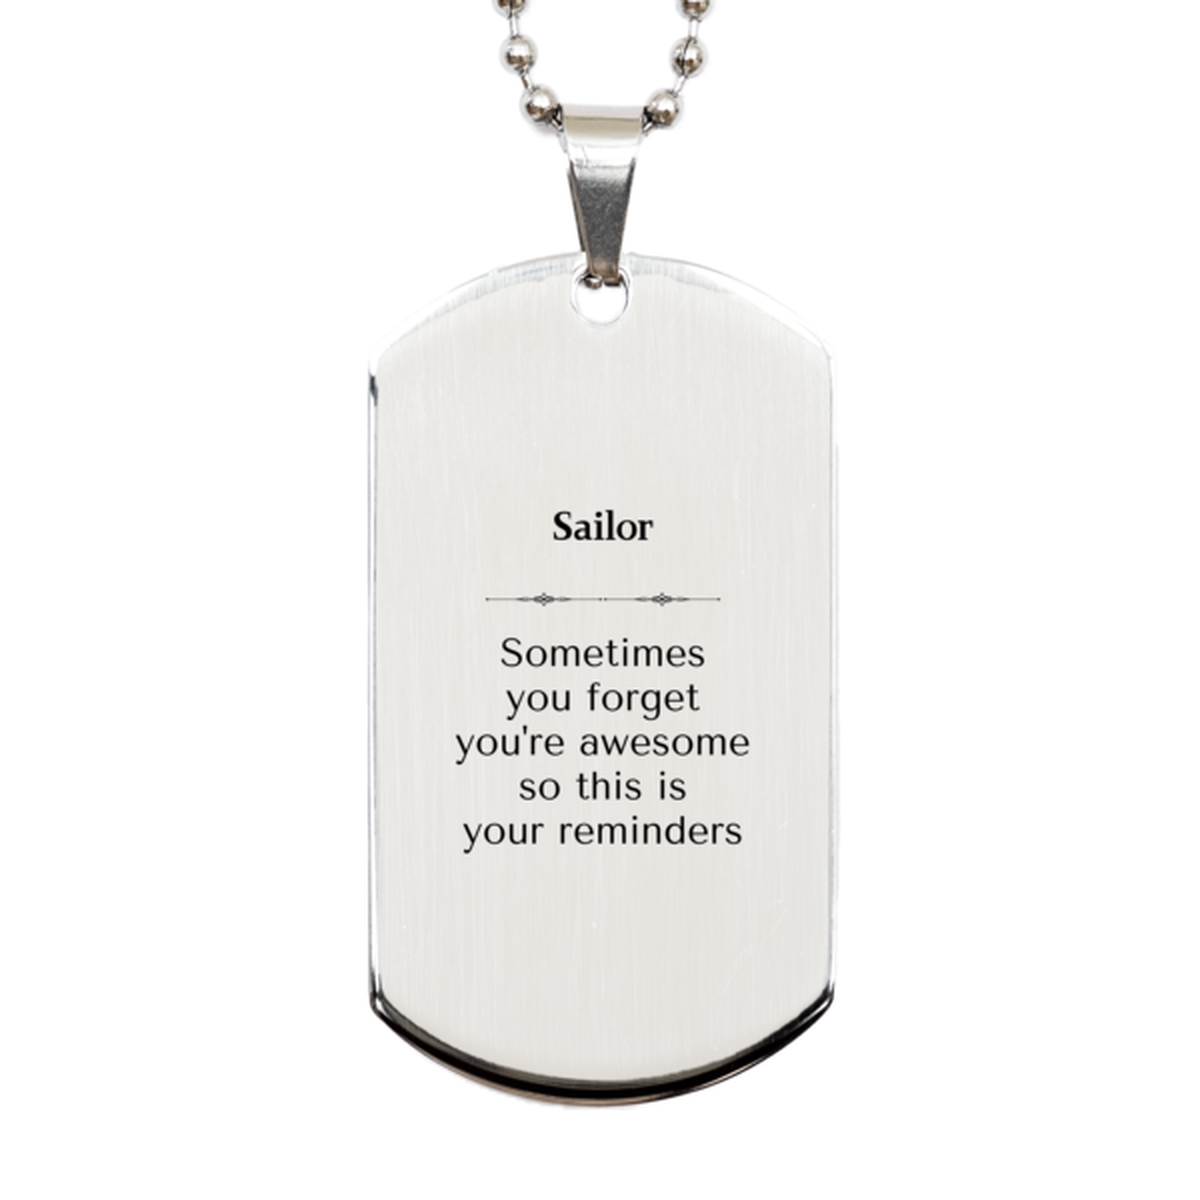 Sentimental Sailor Silver Dog Tag, Sailor Sometimes you forget you're awesome so this is your reminders, Graduation Christmas Birthday Gifts for Sailor, Men, Women, Coworkers